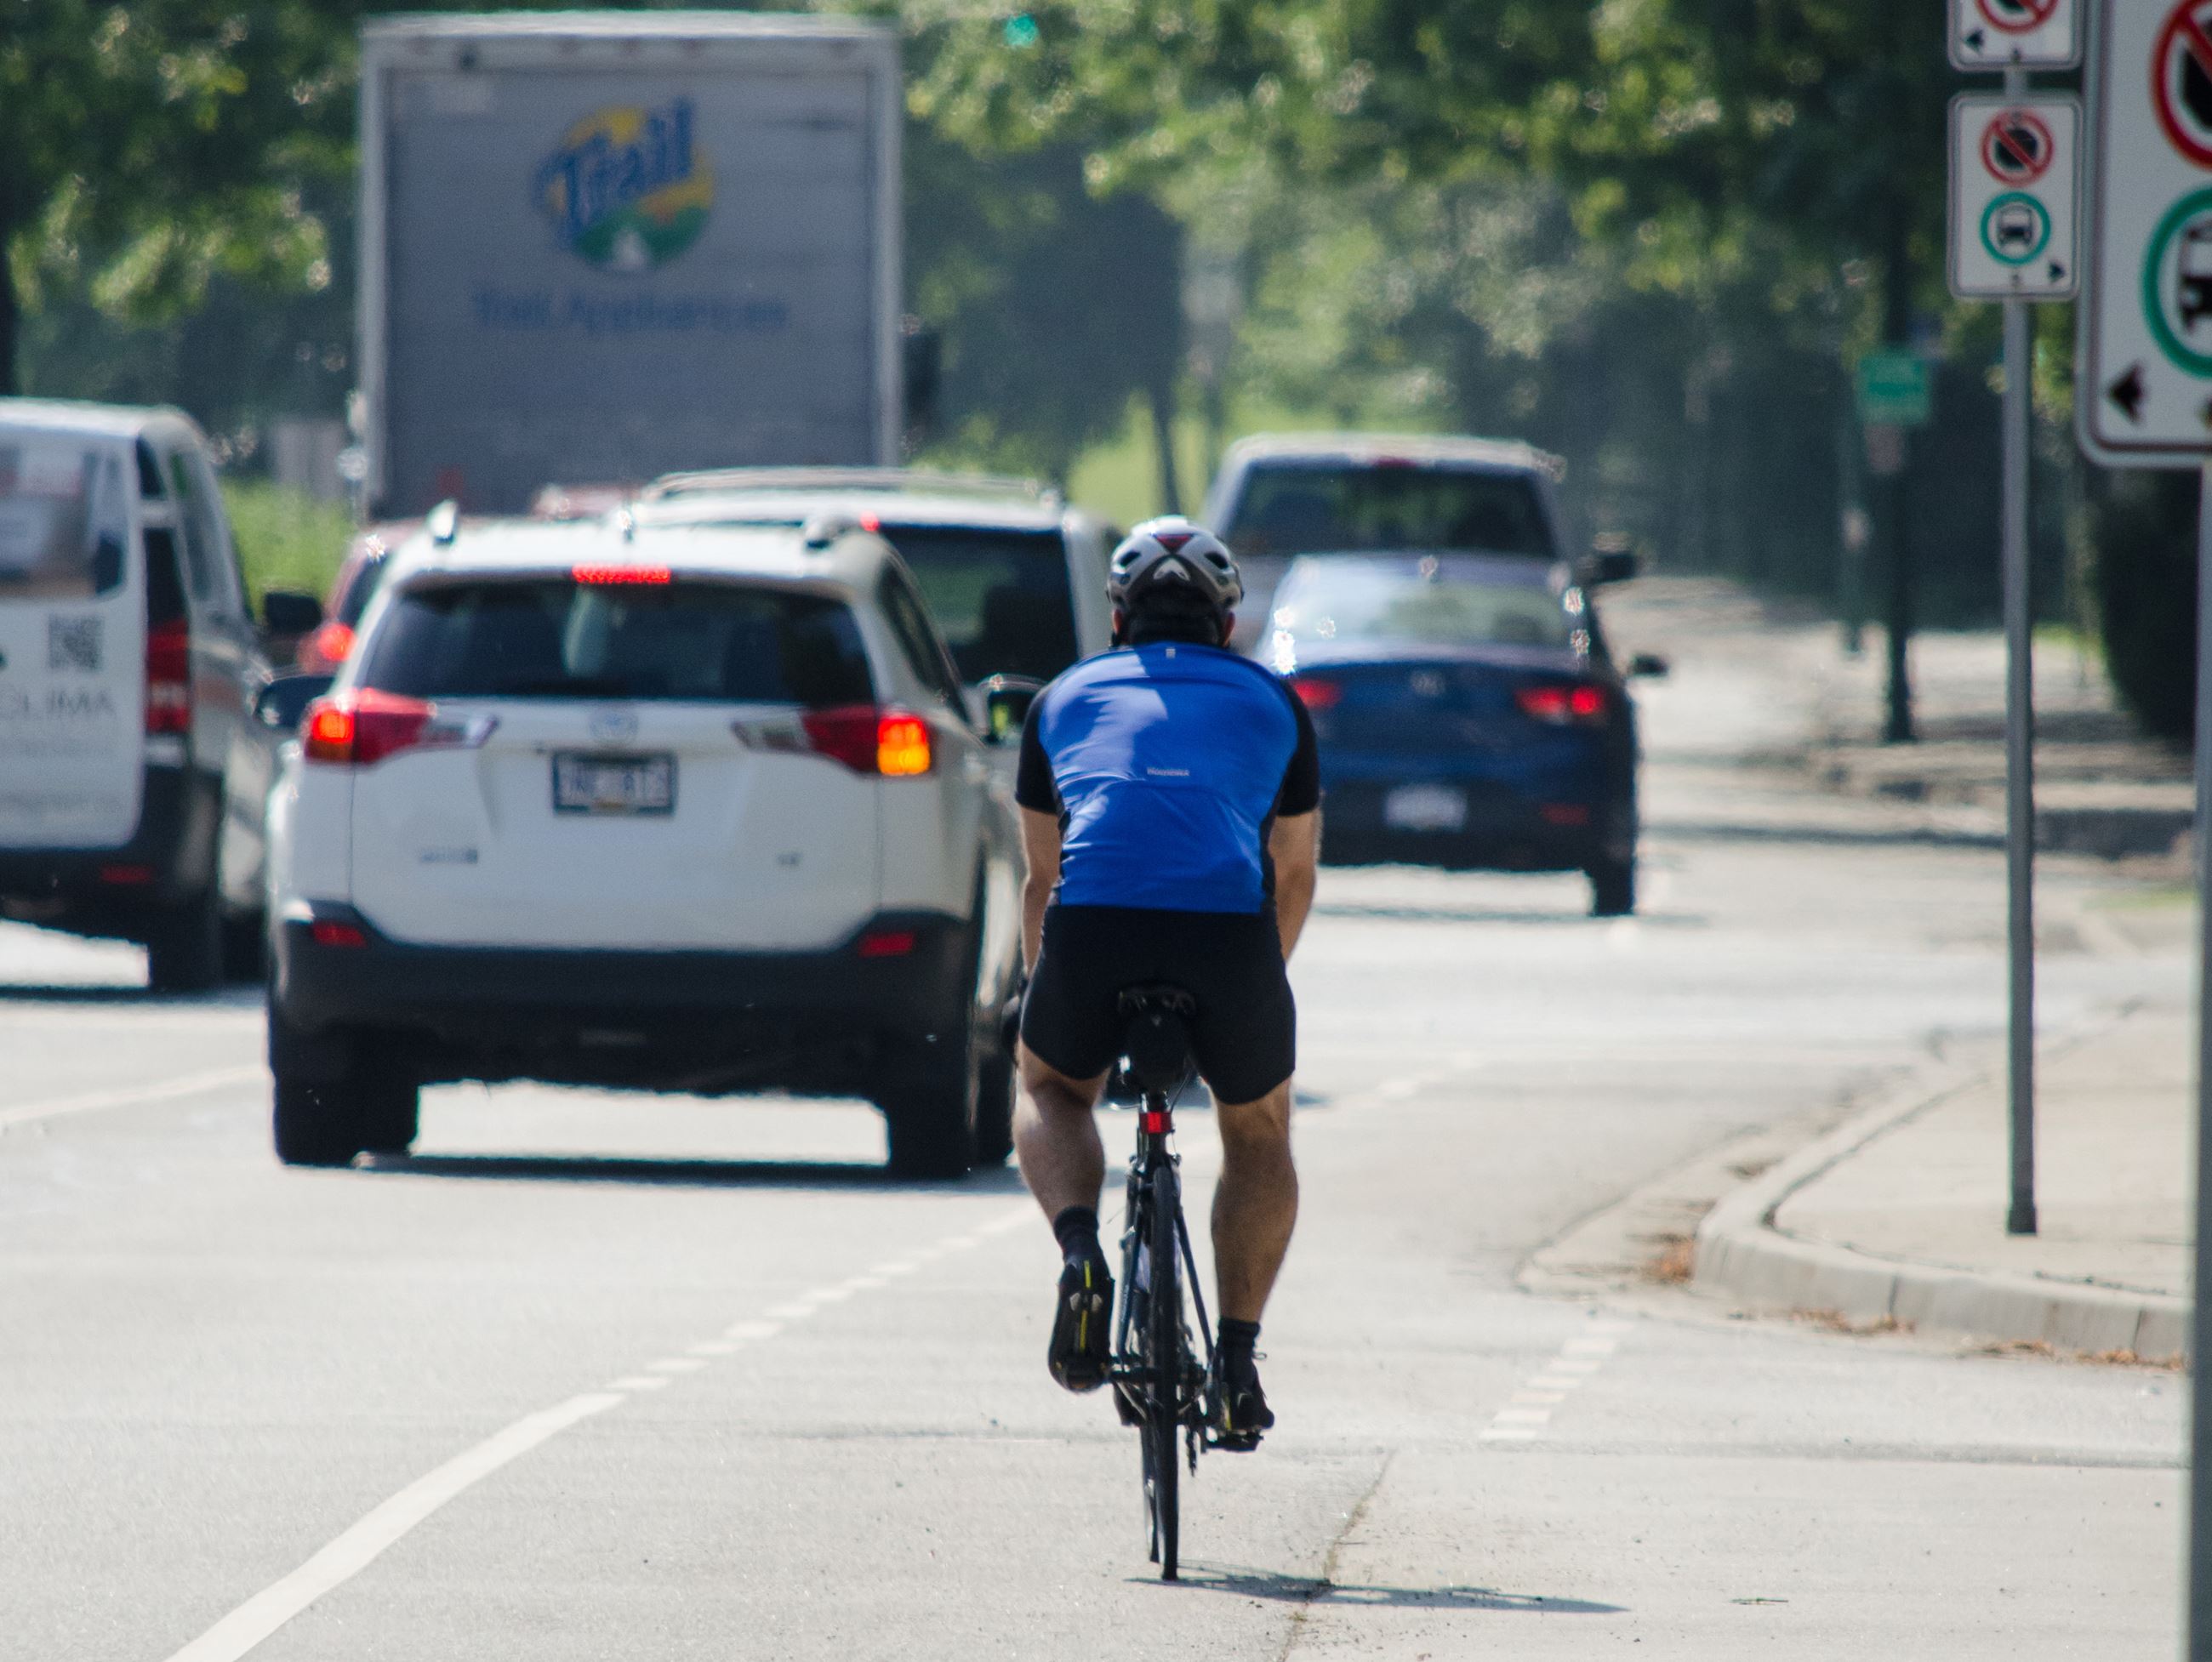 A cyclist rides on a busy street next to cars and trucks